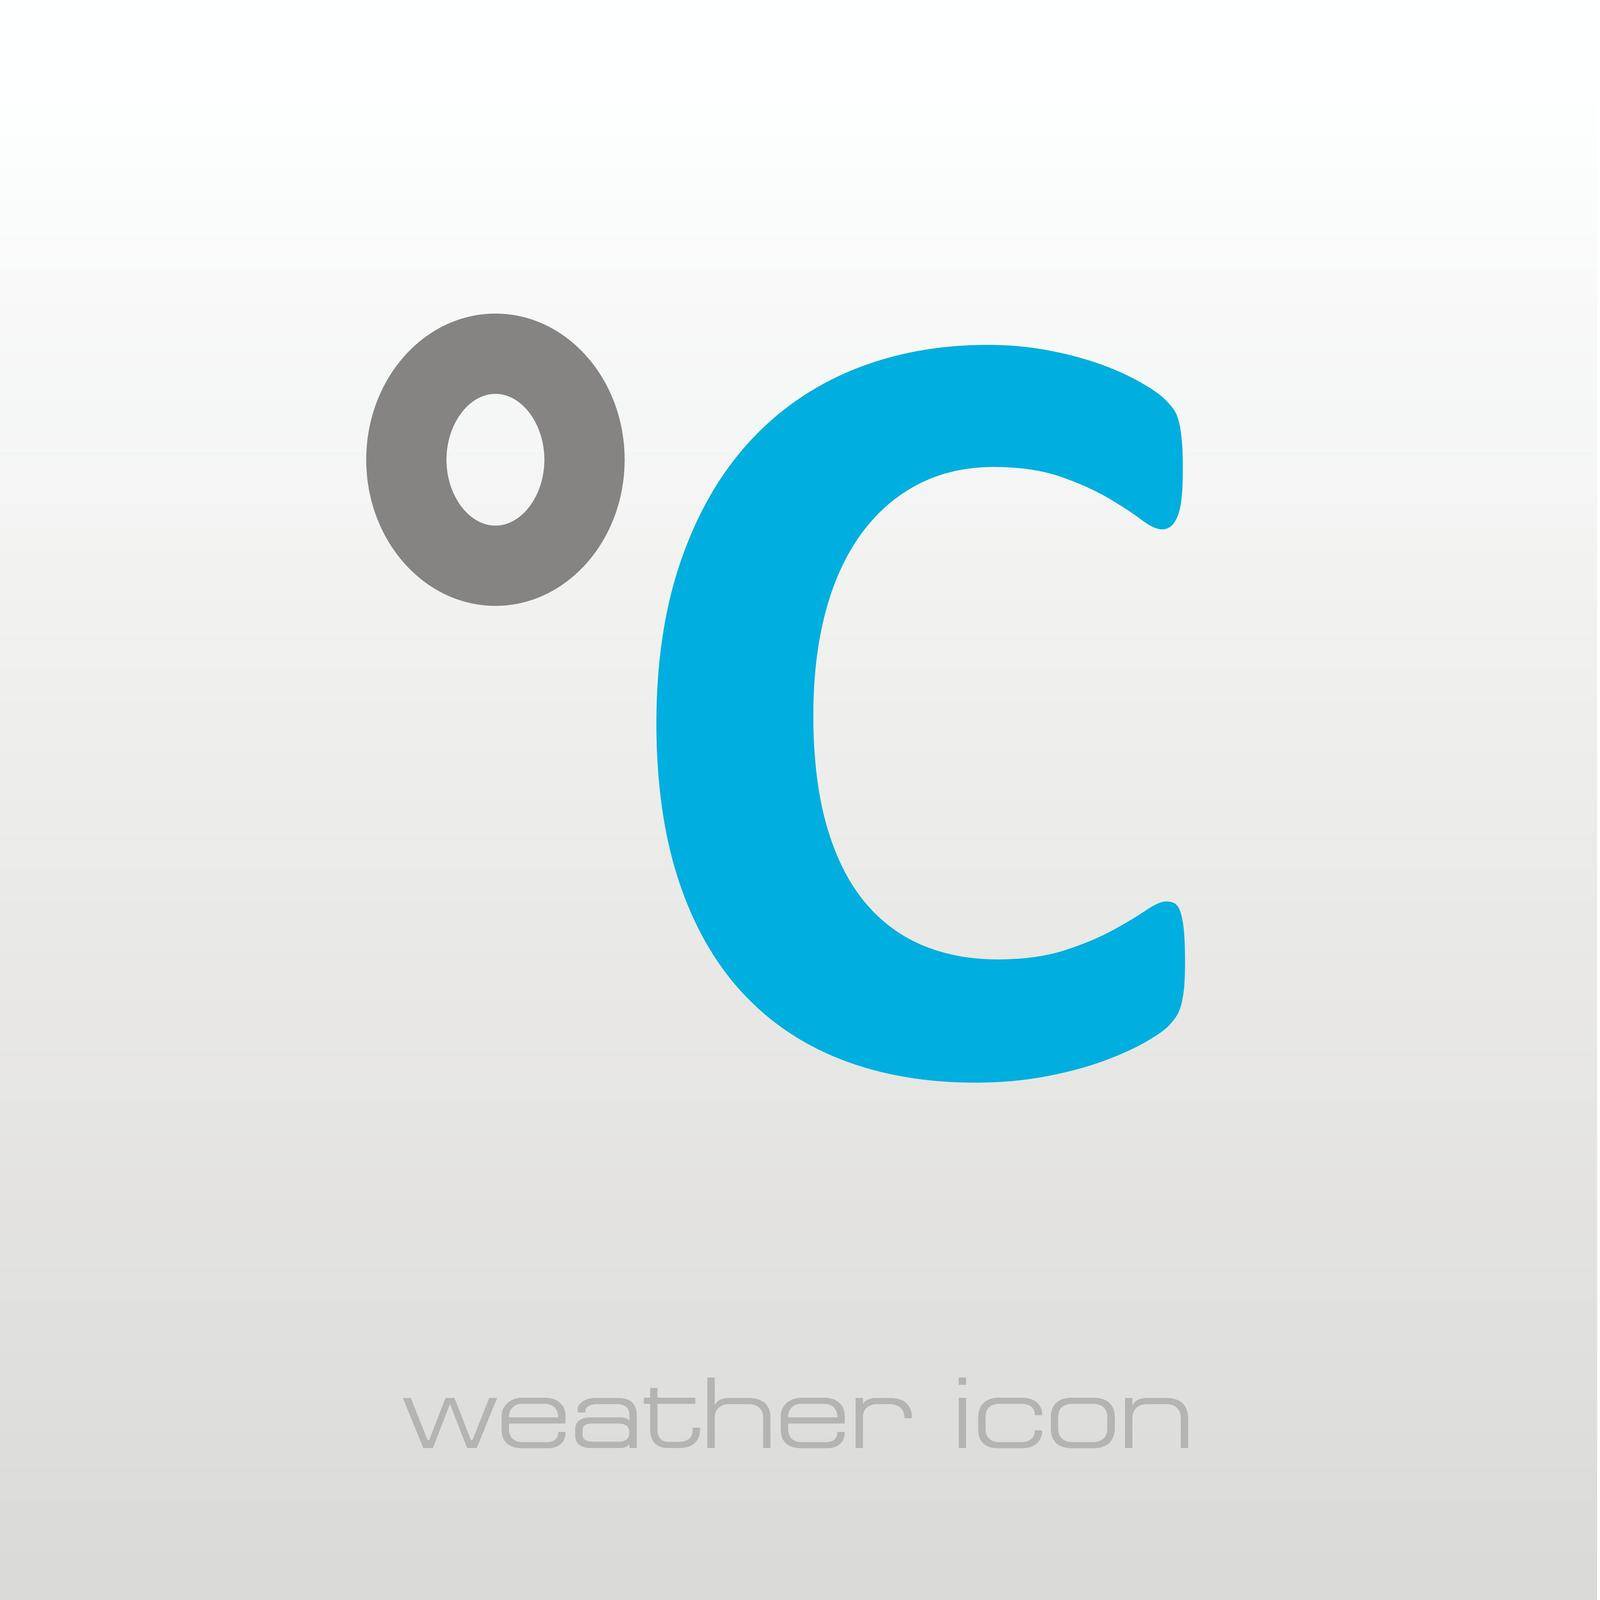 Degrees Celsius icon. Meteorology. Weather by nosik